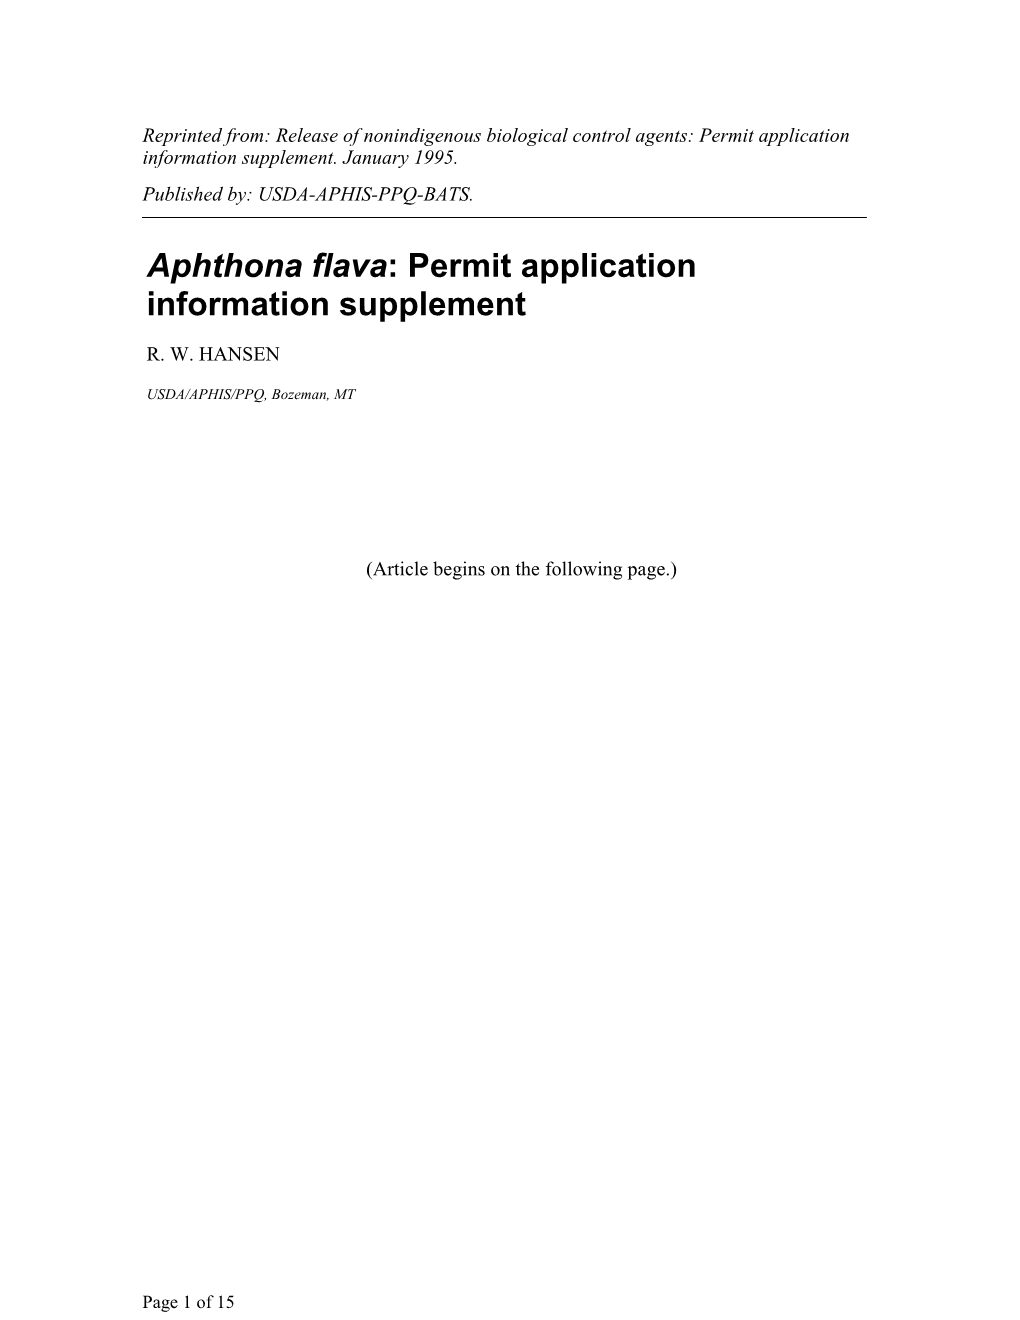 Aphthona Flava: Permit Application Information Supplement